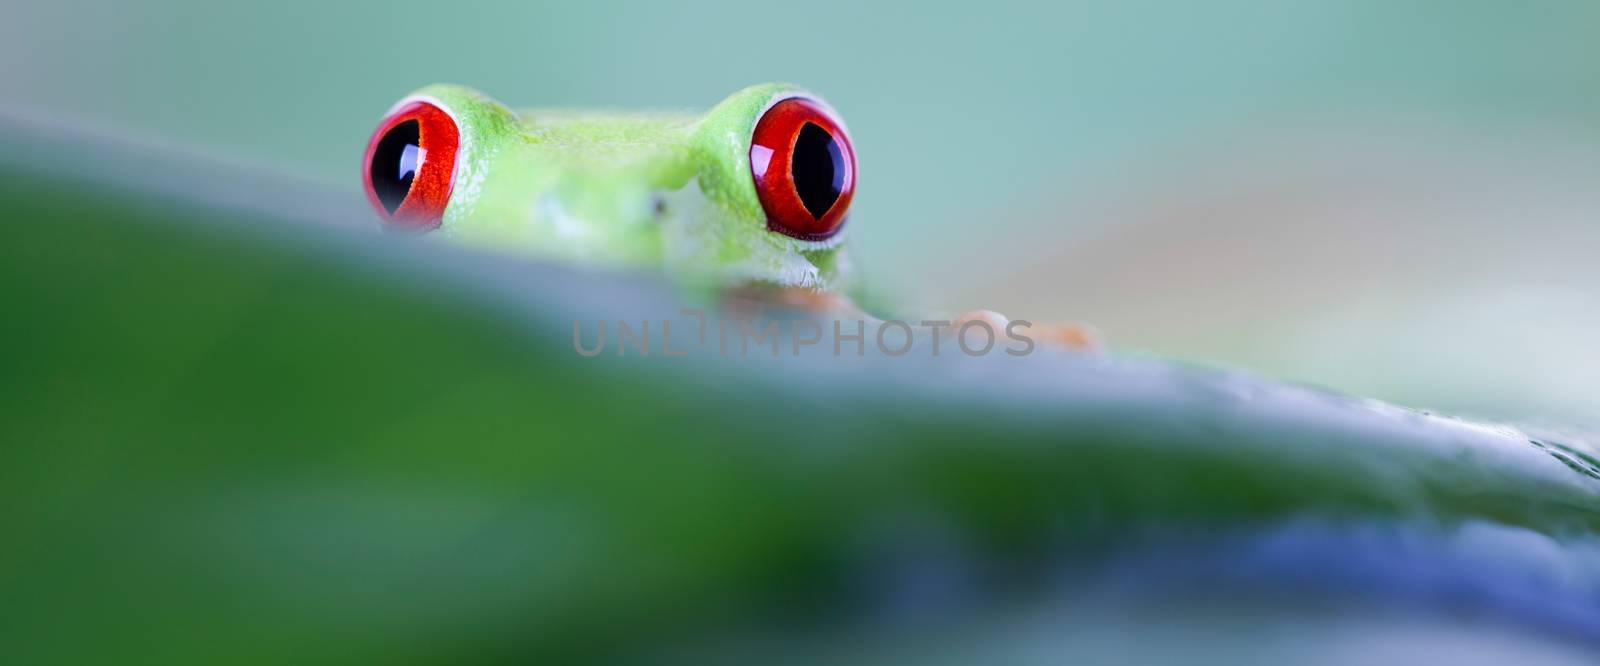 Red eye tree frog on leaf on colorful background by JanPietruszka